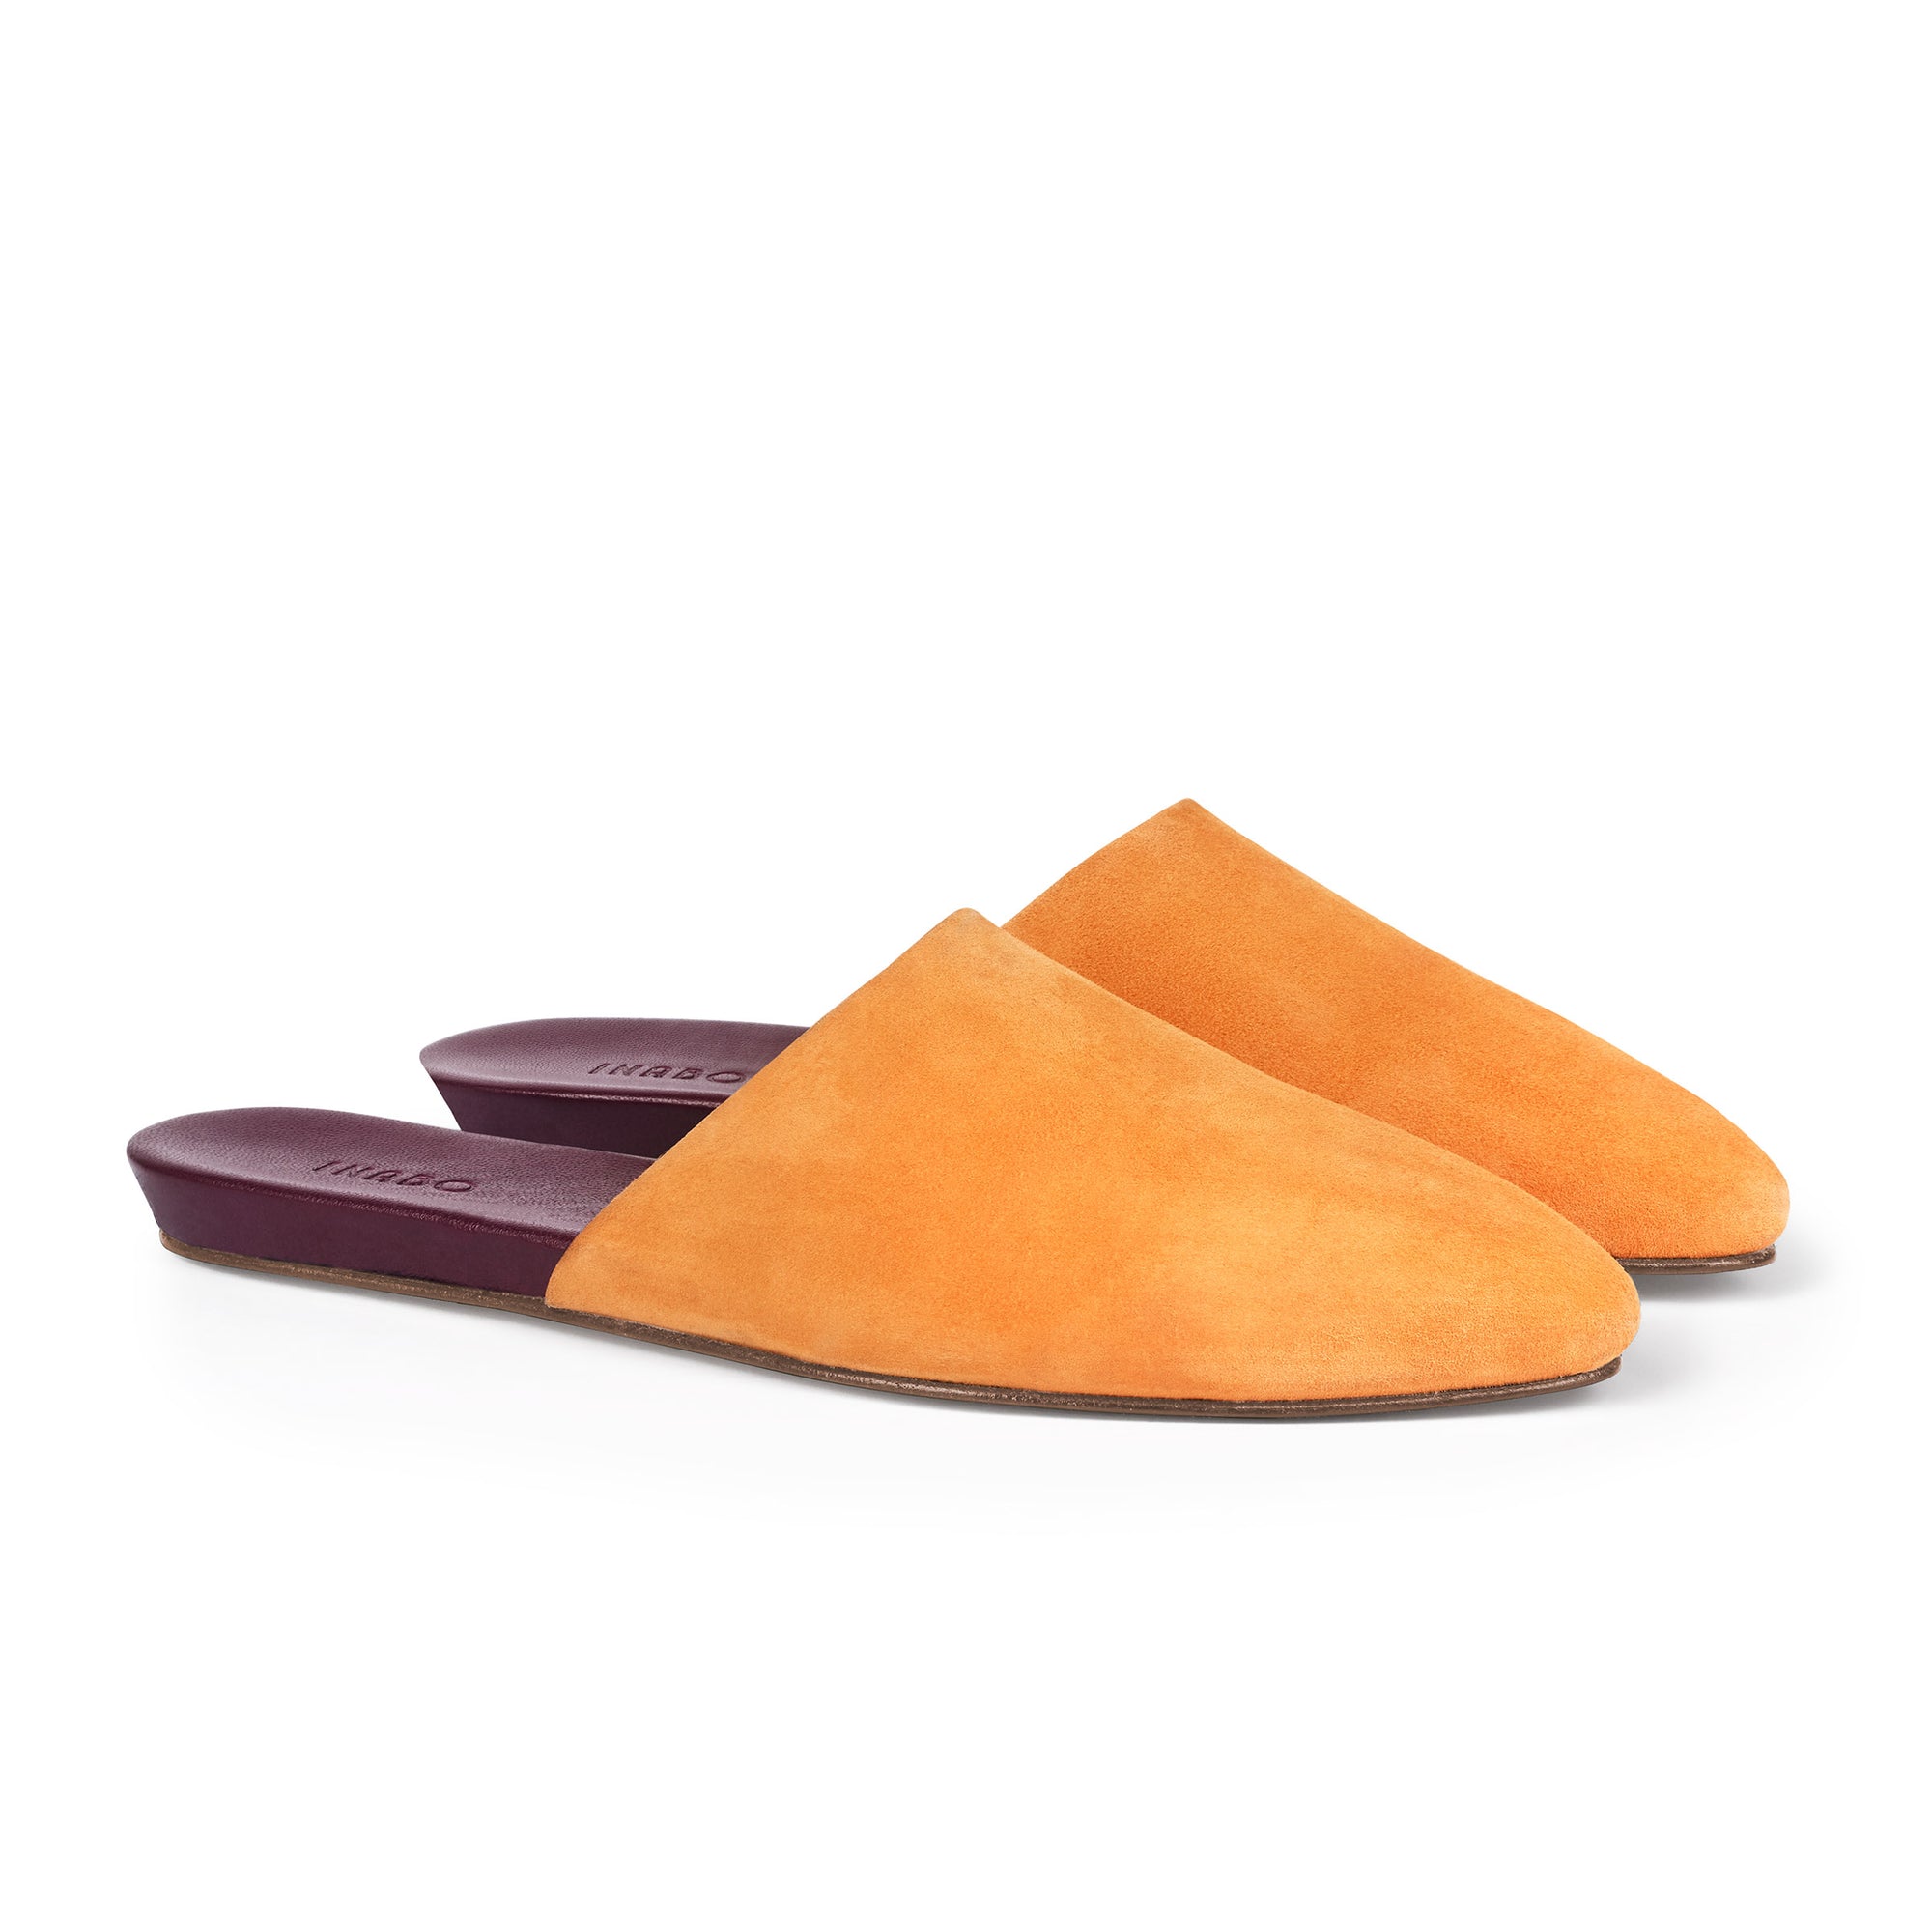 Inabo Women's Slider slipper in Saffron Suede and burgundy leather insole 